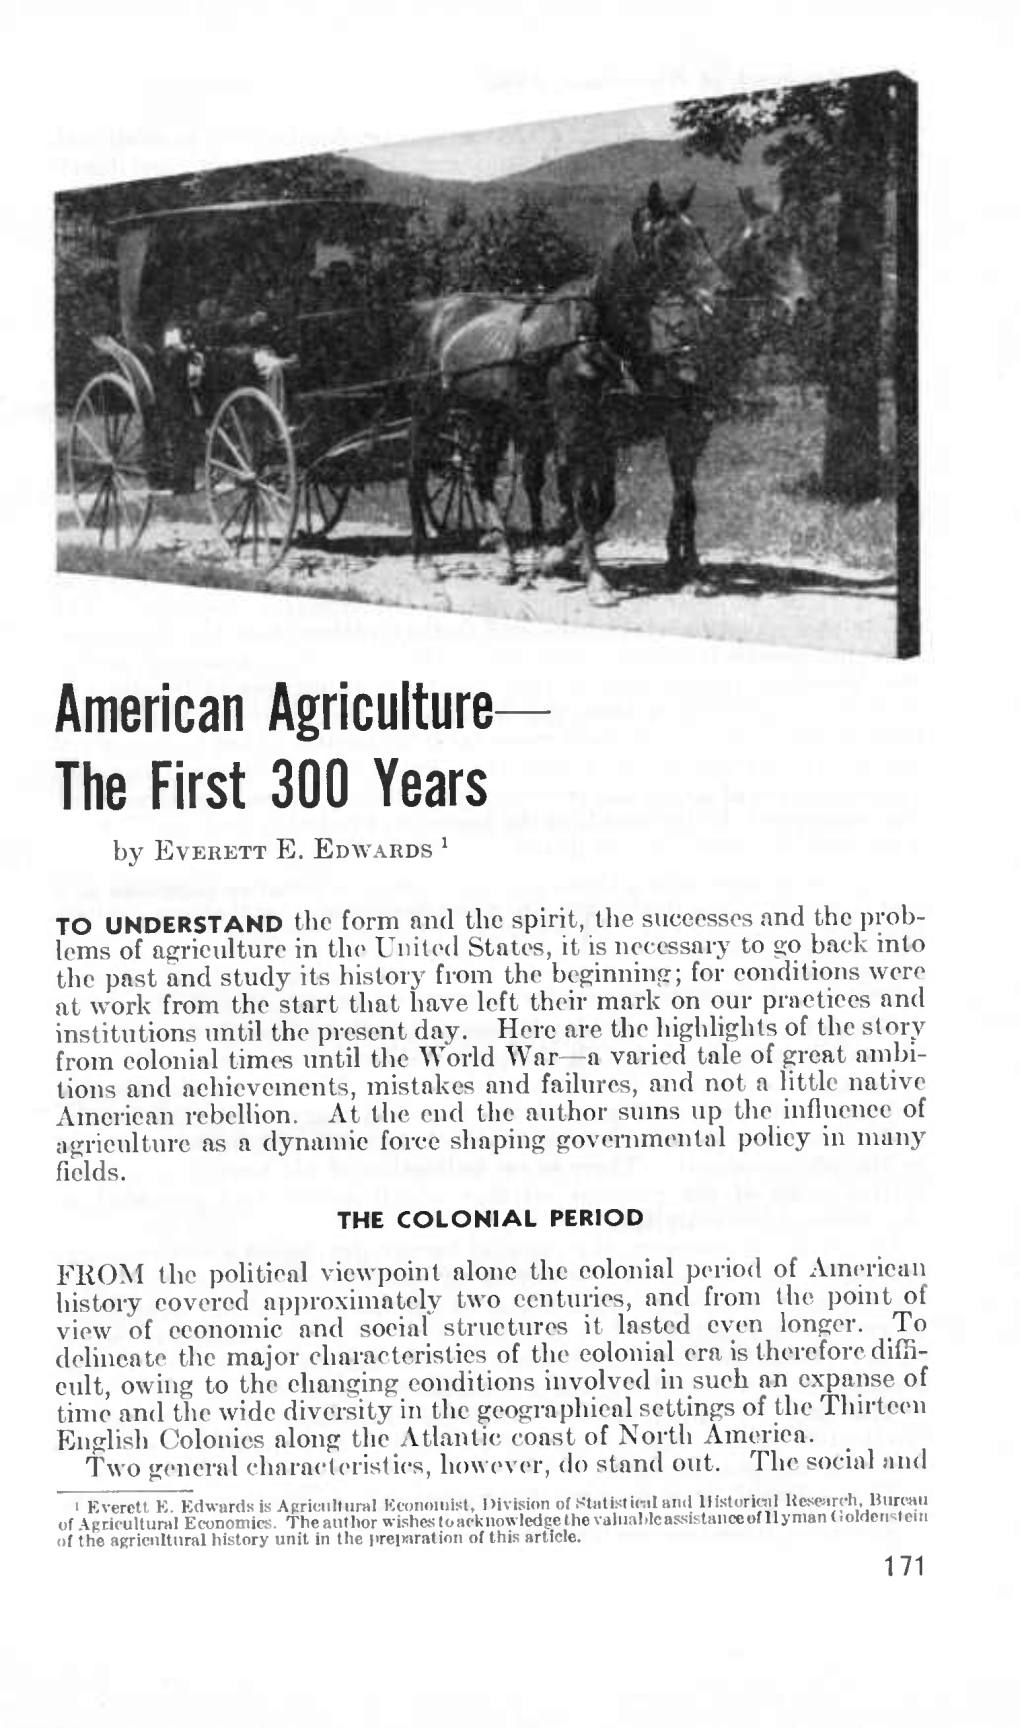 American Agriculture Tlie First 300 Years by EVERETT E